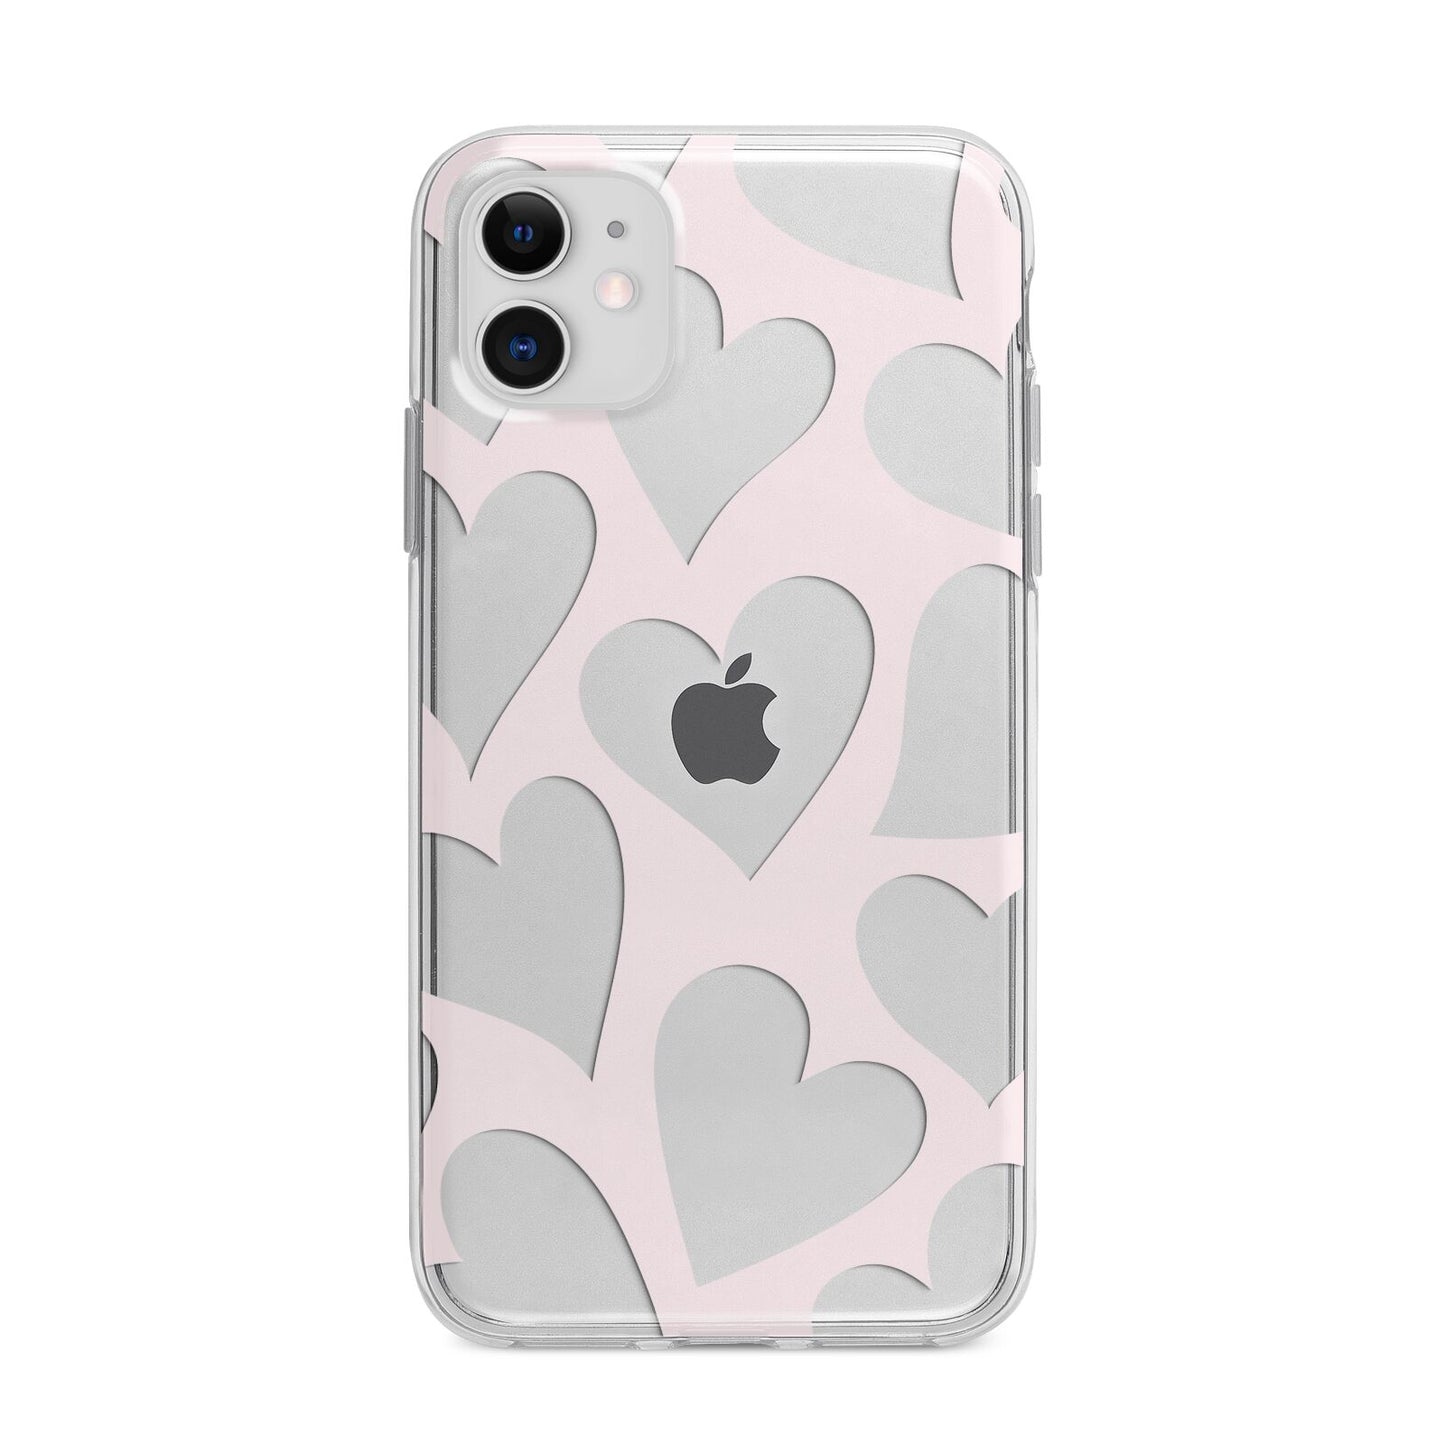 Heart Apple iPhone 11 in White with Bumper Case